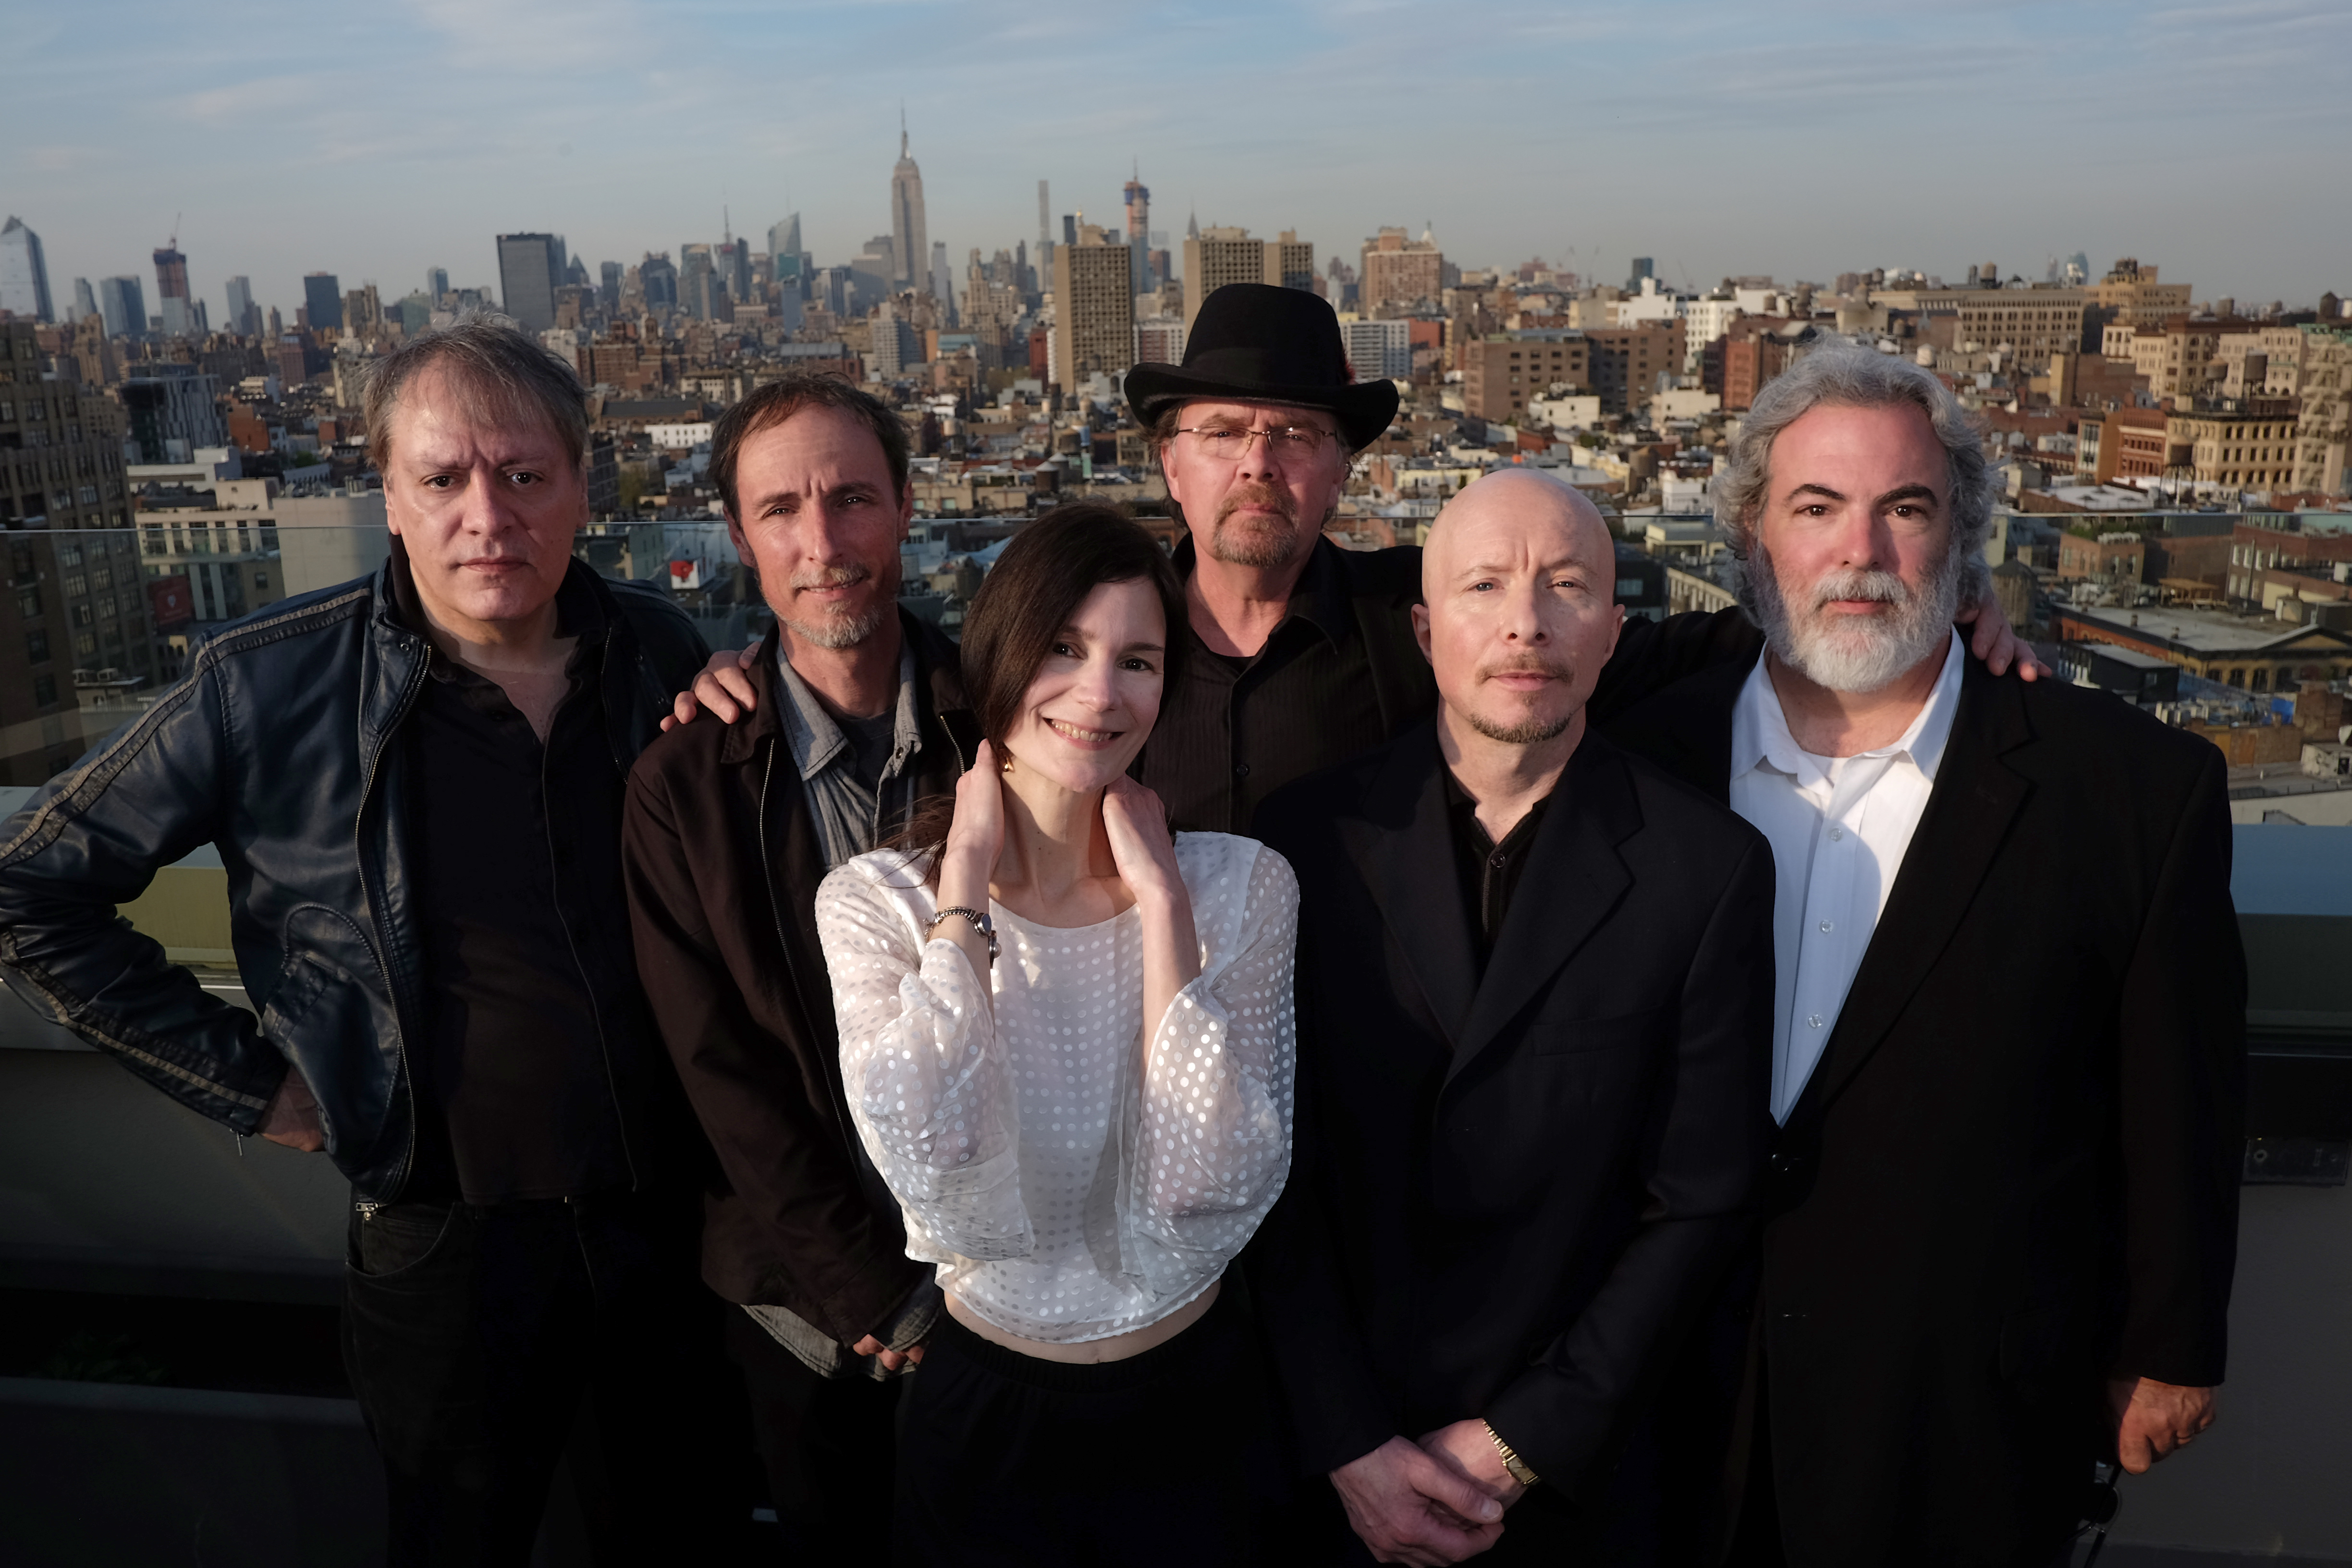 (L-R) John Lombardo, Jeff Erickson, Mary Ramsey, Steve Gustafson, Jerry Augustyniak, and Dennis Drew, of the 10,000 Maniacs pose for a portrait at the Sheraton Tribeca Hotel in Manhattan, New York on Thursday, April 21, 2016. (Thomas Levinson/New York Daily News)